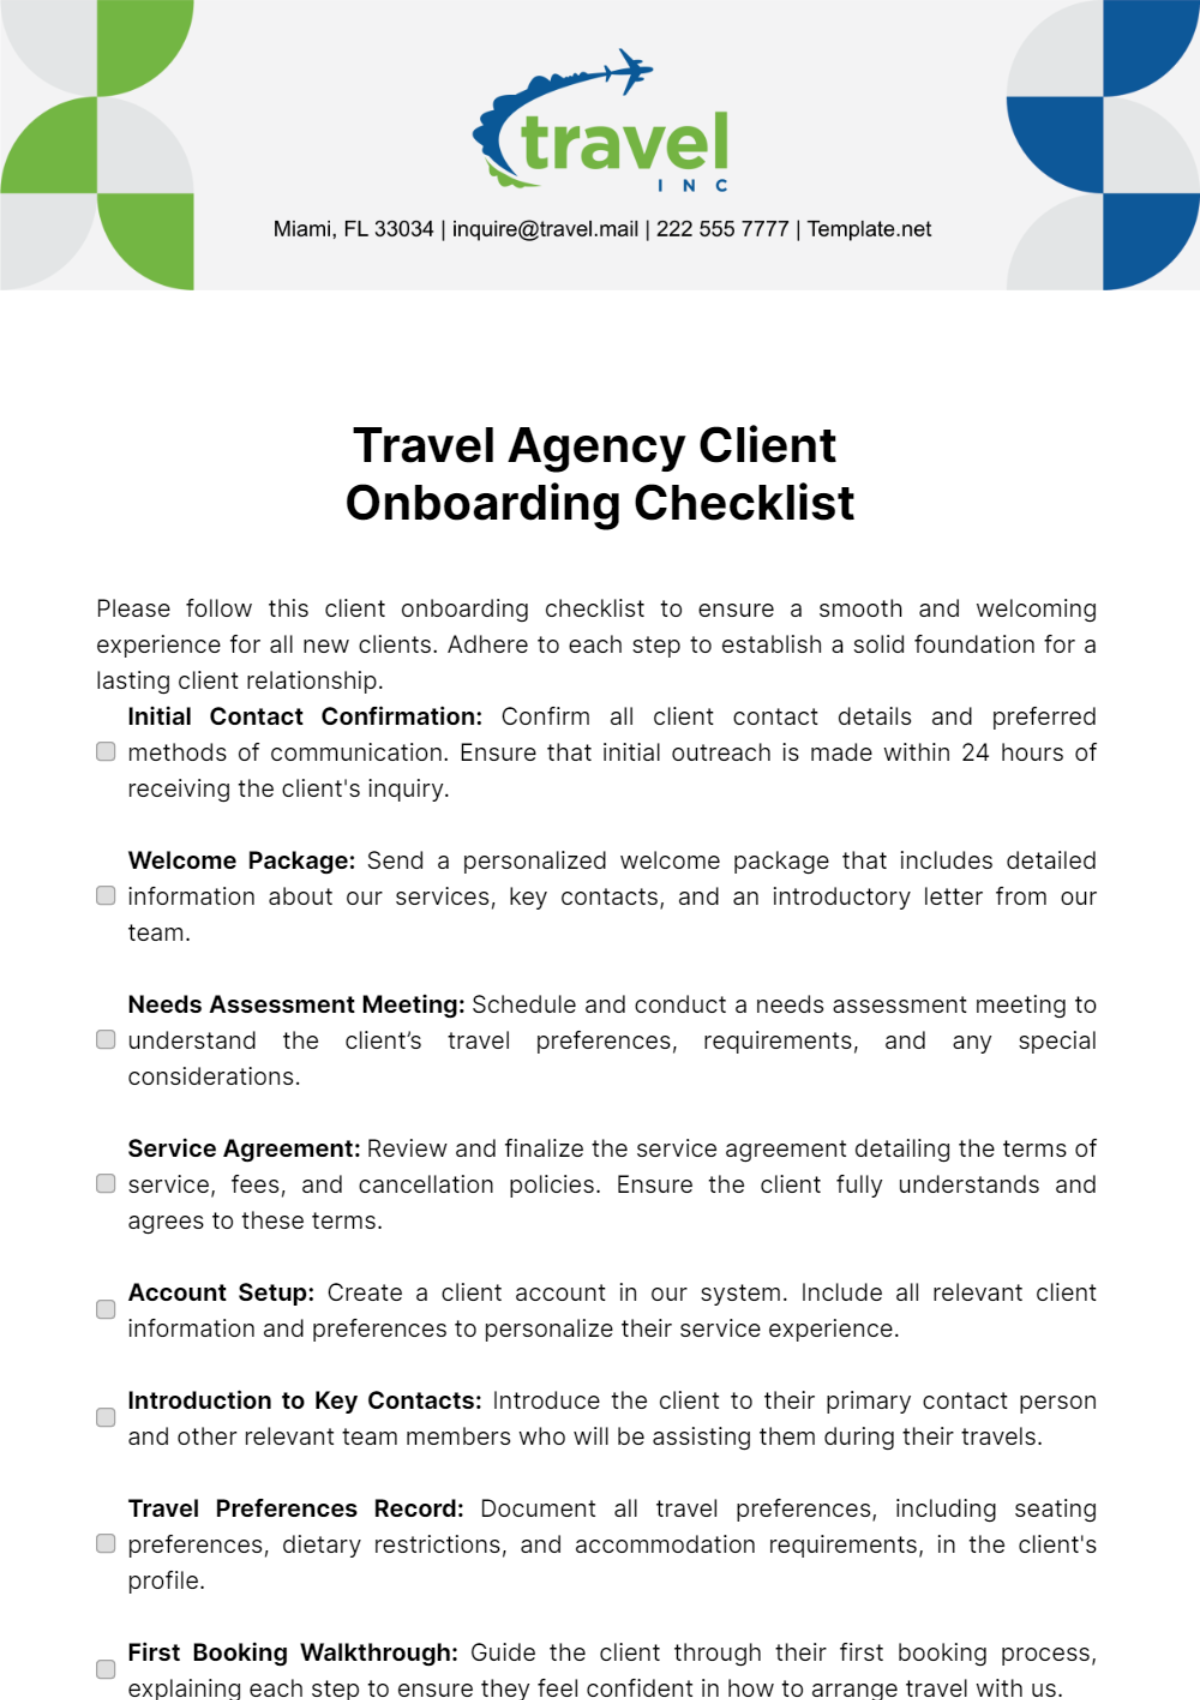 Free Travel Agency Client Onboarding Checklist Template